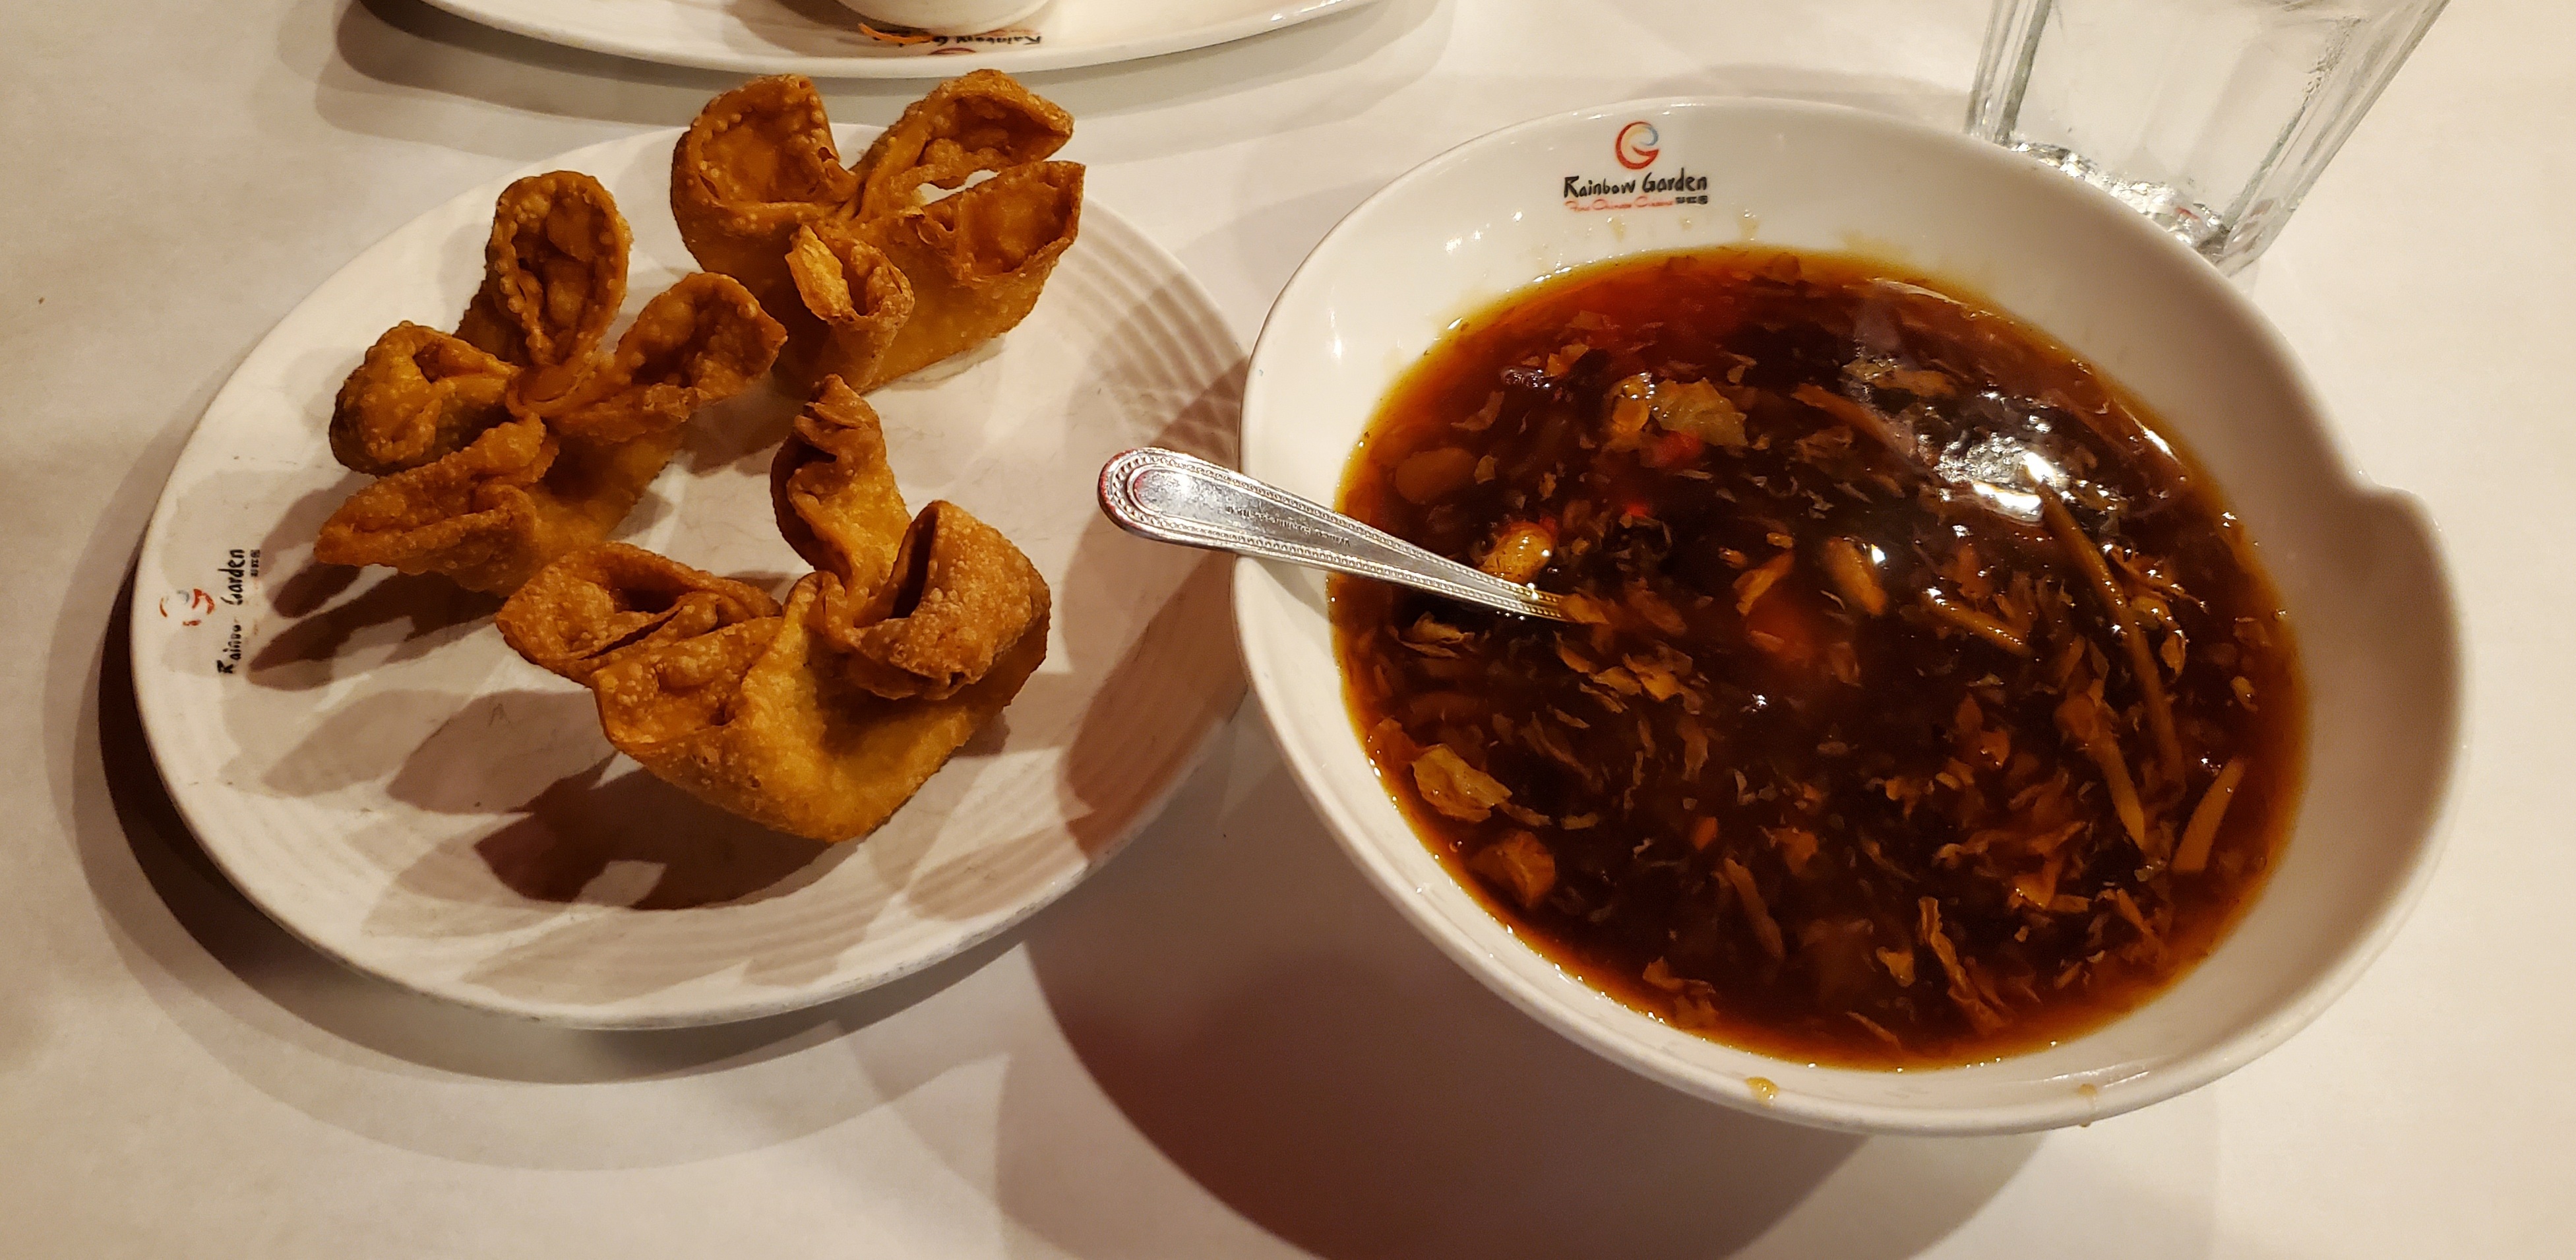 On a white table, there is a plate of crab rangoons and a white bowl of hot and sour soup. Photo by Carl Busch.